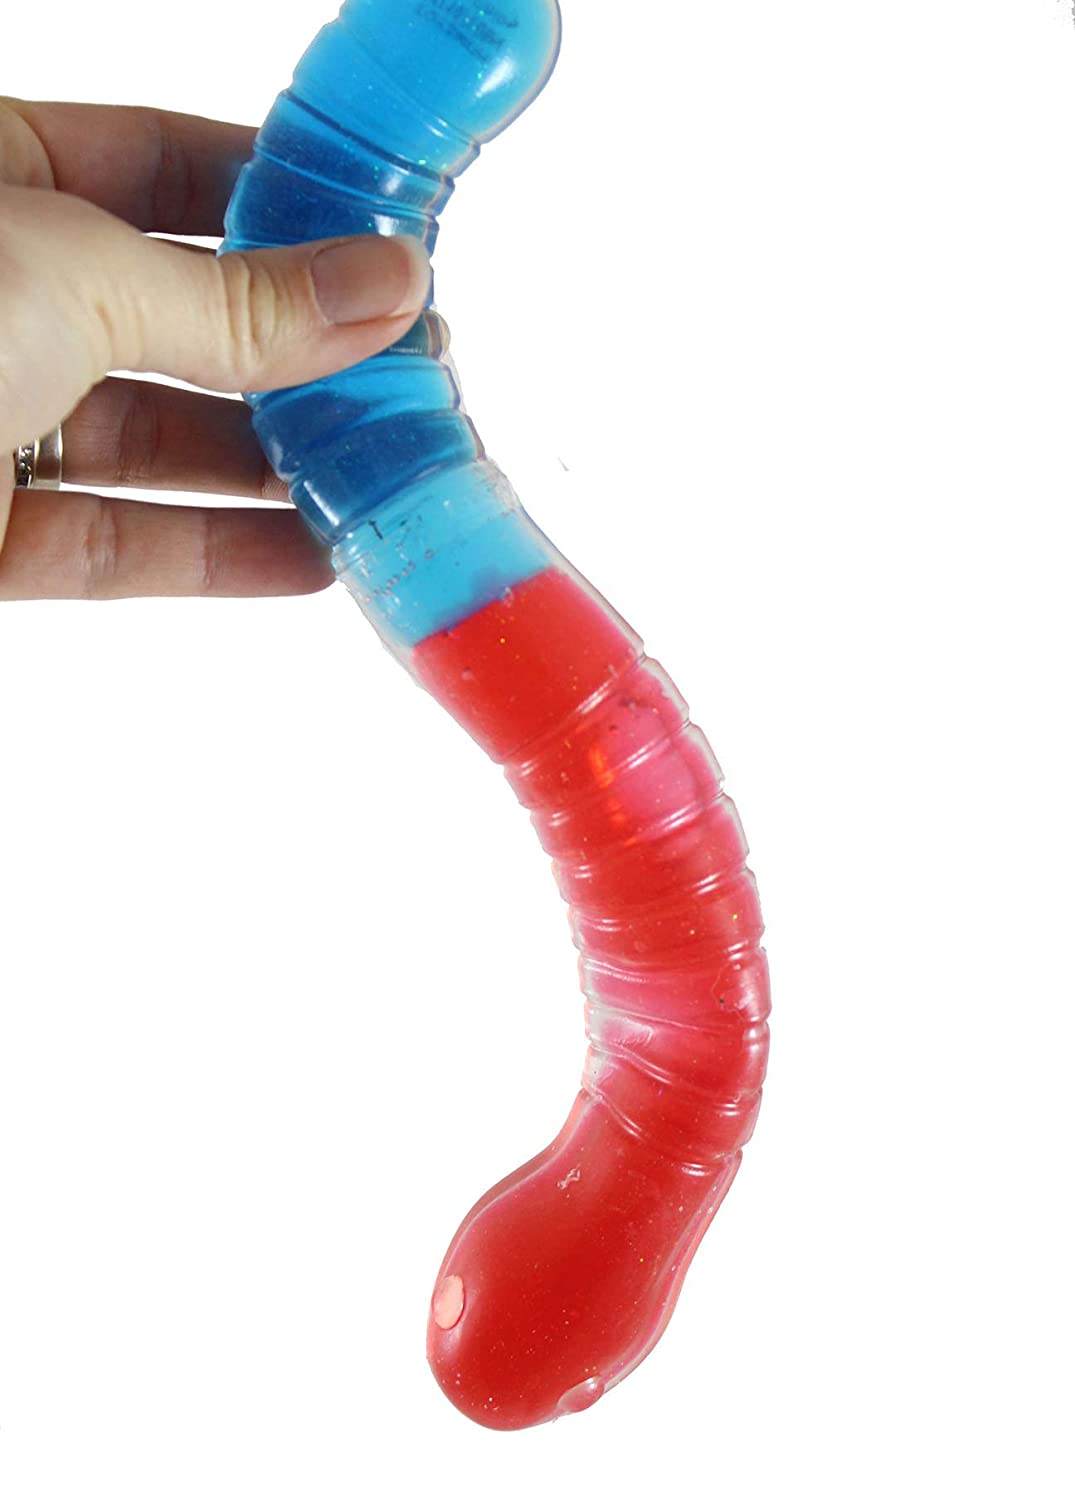 1 Jumbo Gummy Worm - Large Squishy Sensory Gooey Fidget Toy - Realistic - Looks Like the Candy - But Not Edible Stress, Squeeze Giant ADHD Special Needs Soothing (Random Color) - image 5 of 6